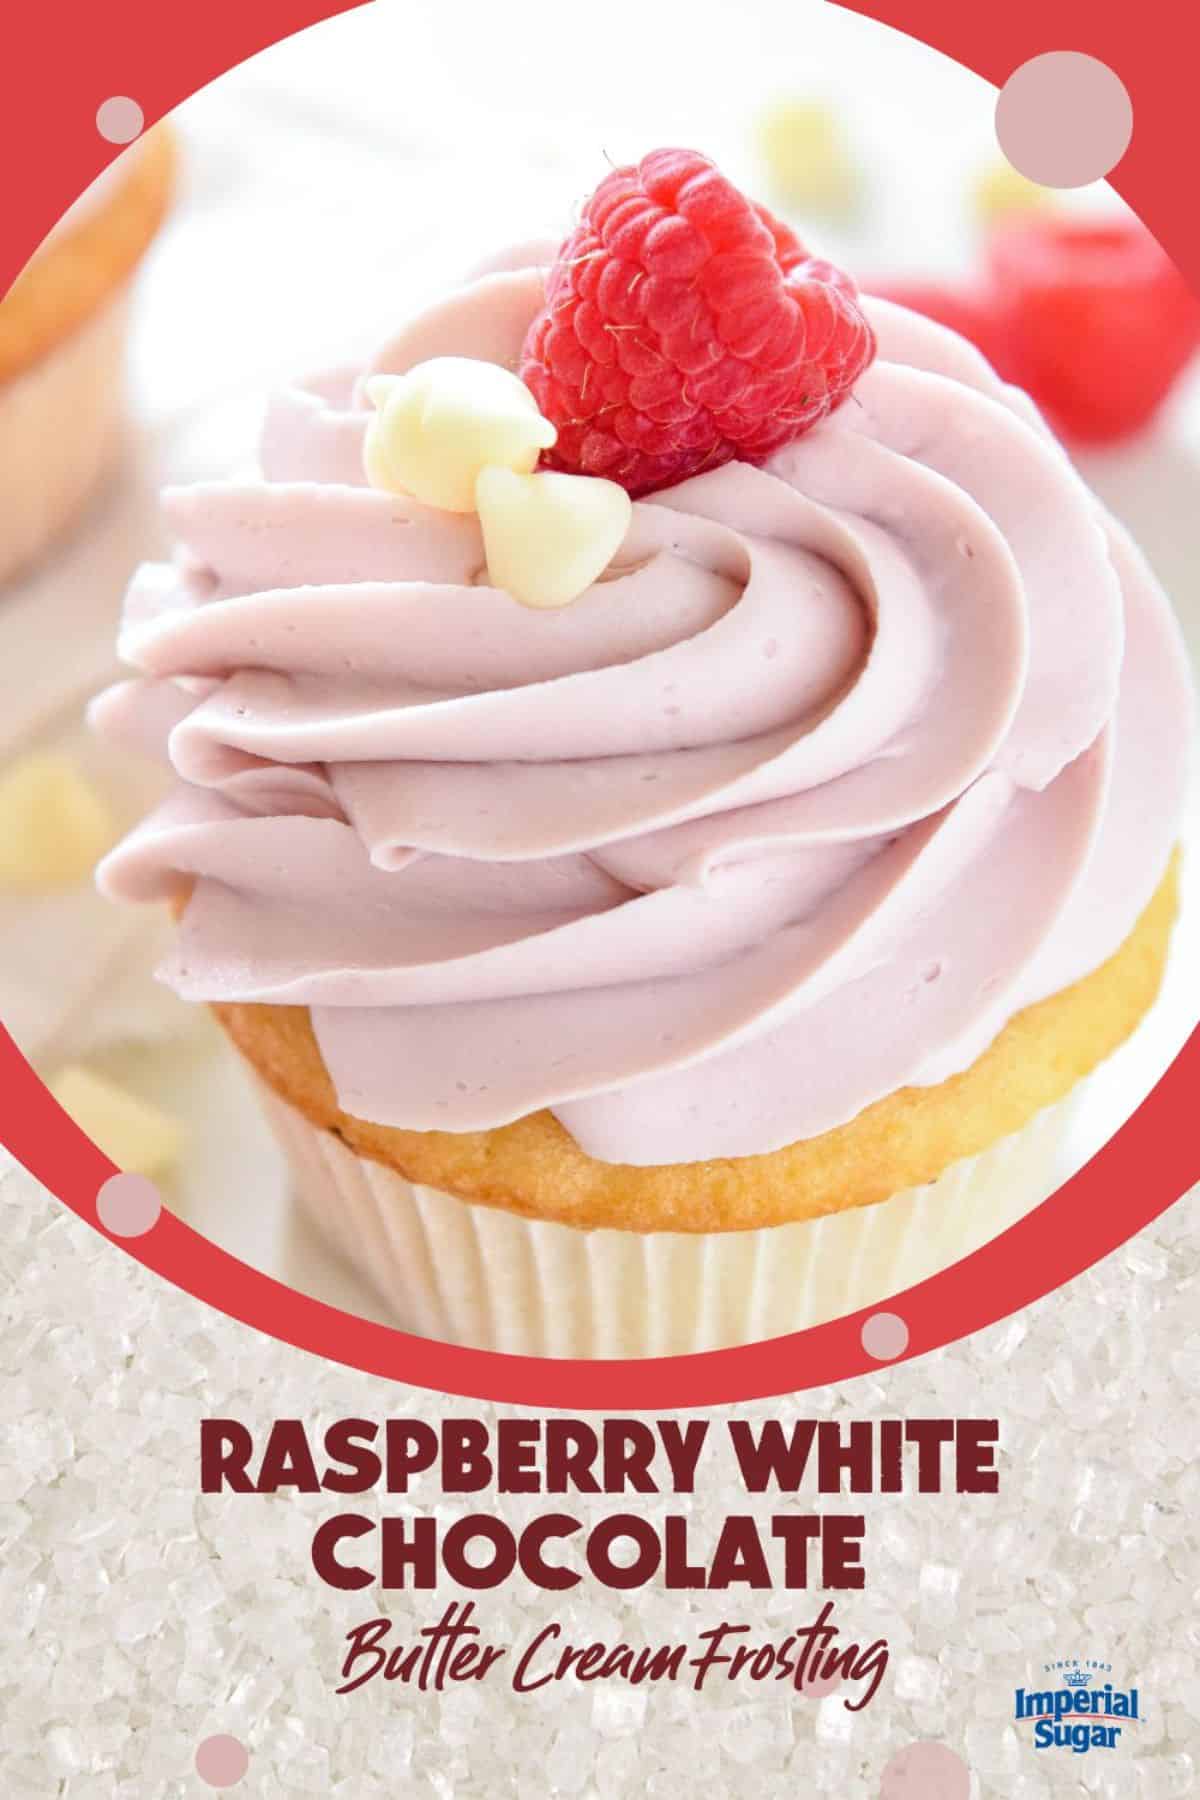 A cupcake with Raspberry White Chocolate Frosting.